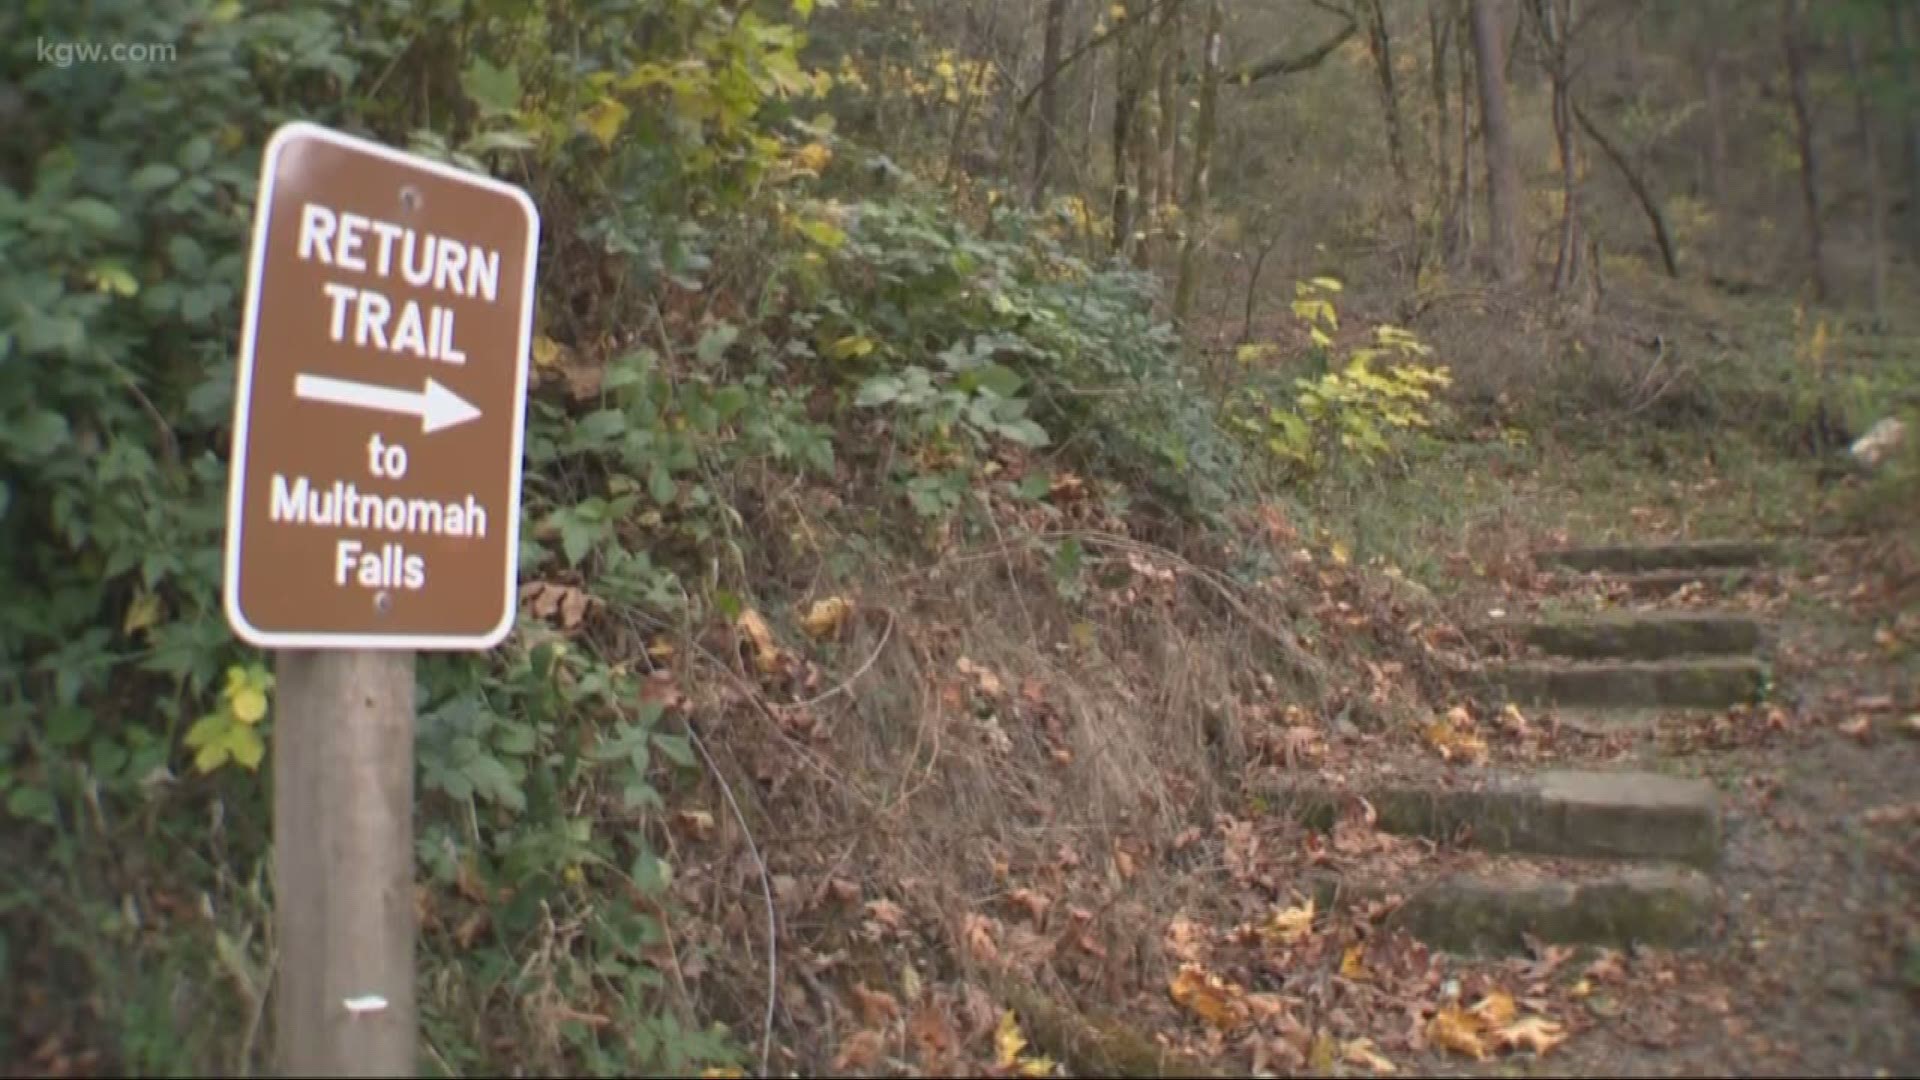 A year after the Eagle Creek Fire, ODOT says it's ready to open up another stretch of the Historic Columbia River Highway within the next few weeks.